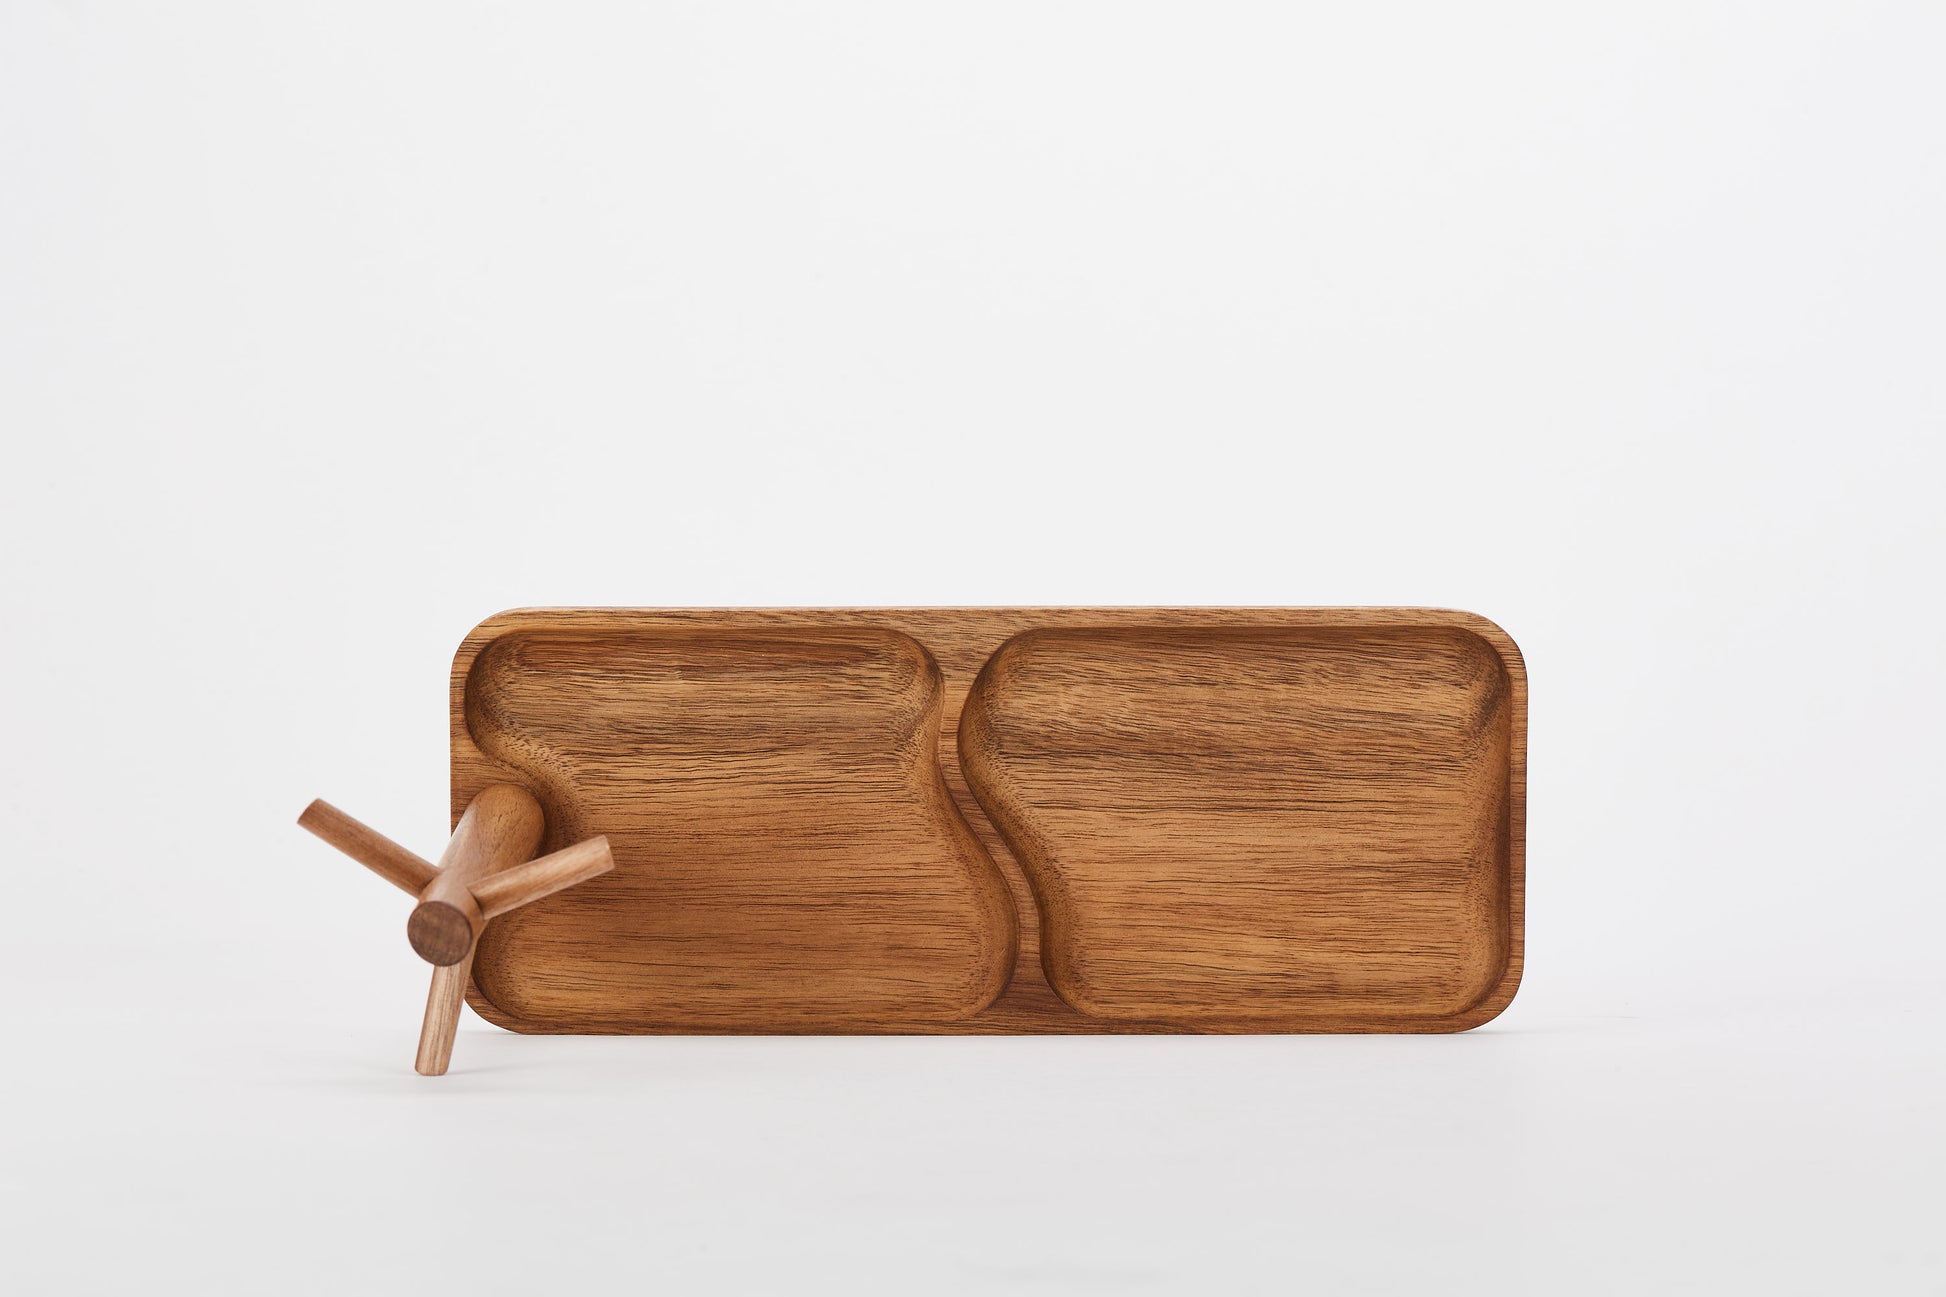 Wooden Peg Table Top Organizer - Lucid and Real